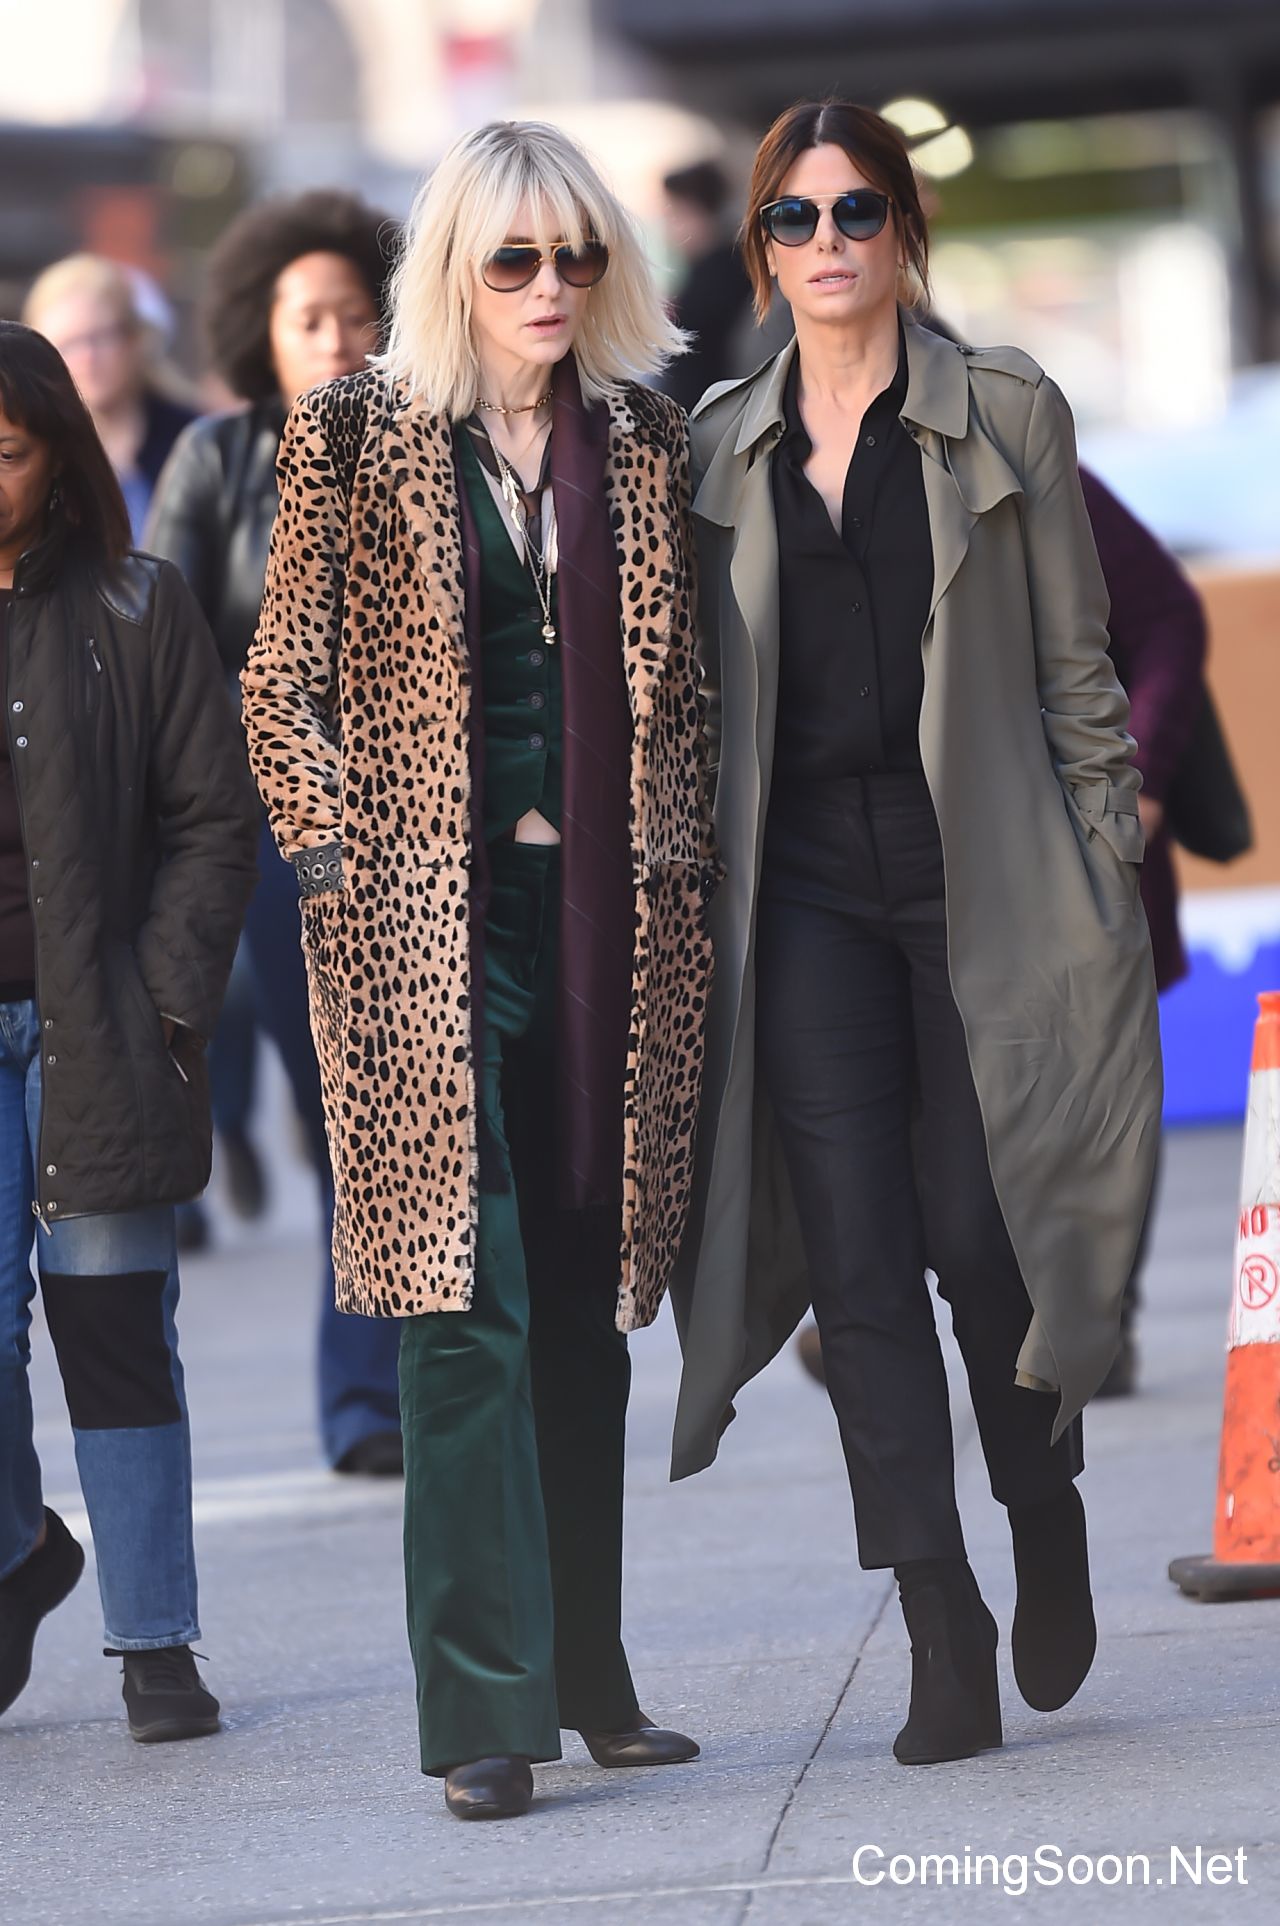 NEW YORK, NY - OCTOBER 24:  Actresses Cate Blanchett and Sandra Bullock (L) are seen on the set of "Ocean's Eight" on October 24, 2016 in New York City.  (Photo by Raymond Hall/GC Images)